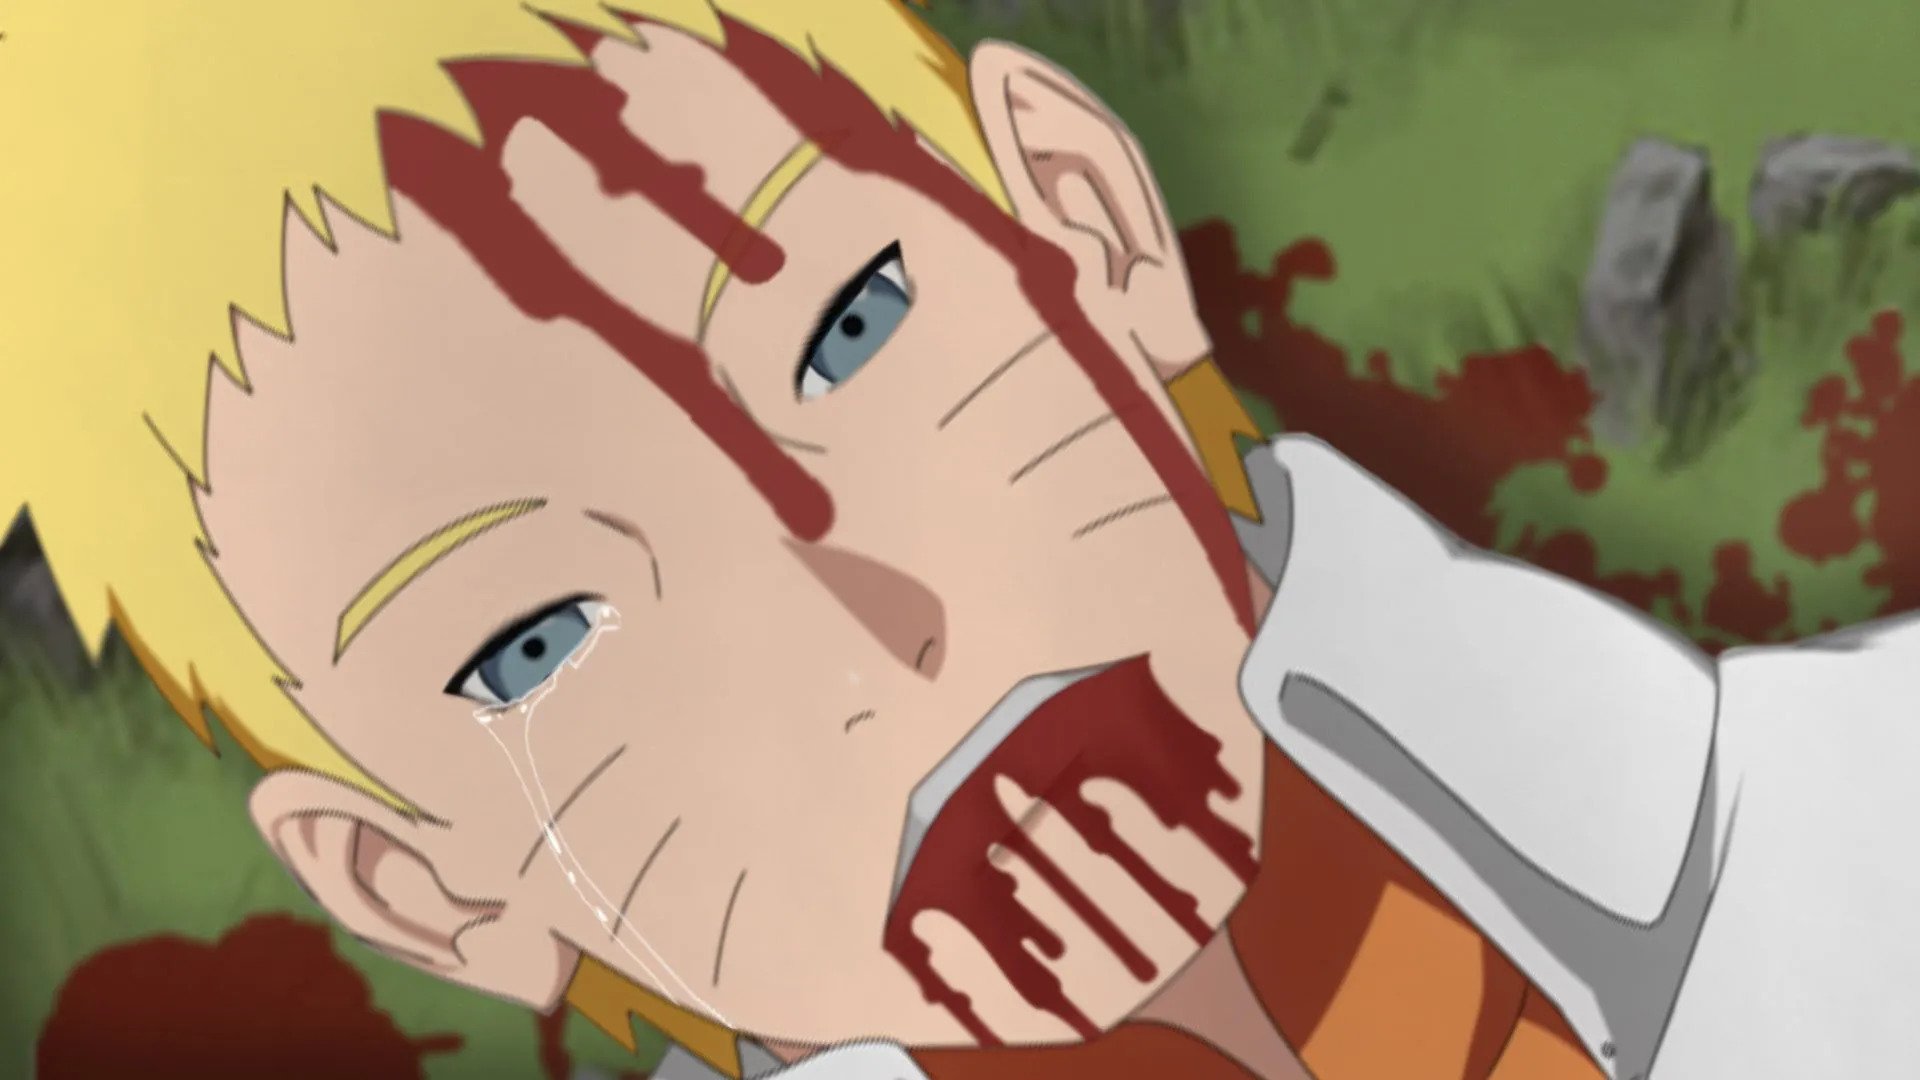 Does Naruto Die in Boruto? (Speculation and Theories) - Fantasy Topics